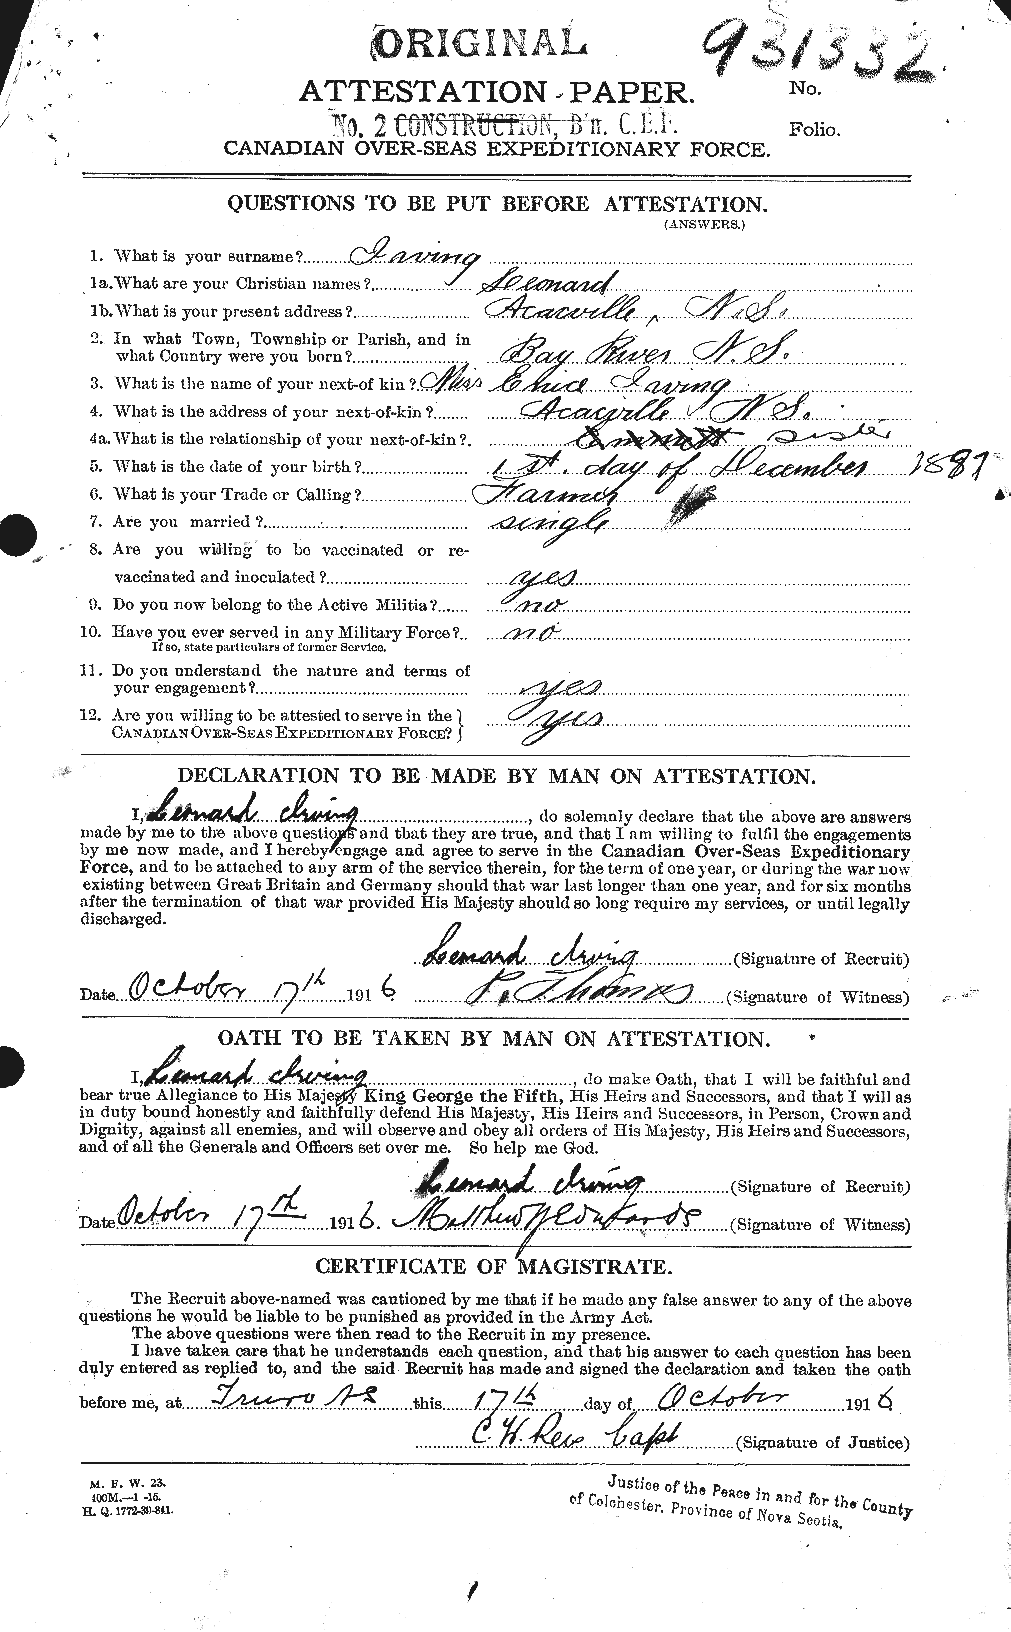 Personnel Records of the First World War - CEF 412696a